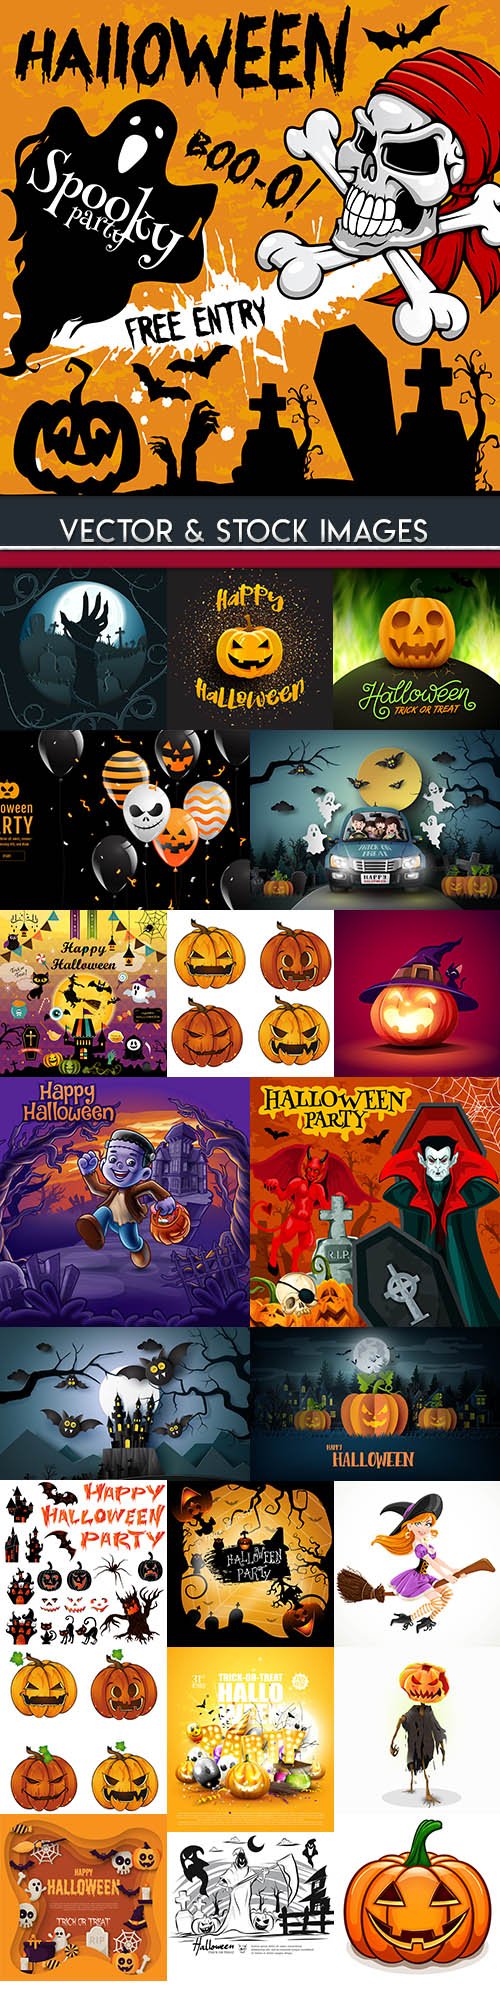 Happy Halloween holiday illustration collection 35